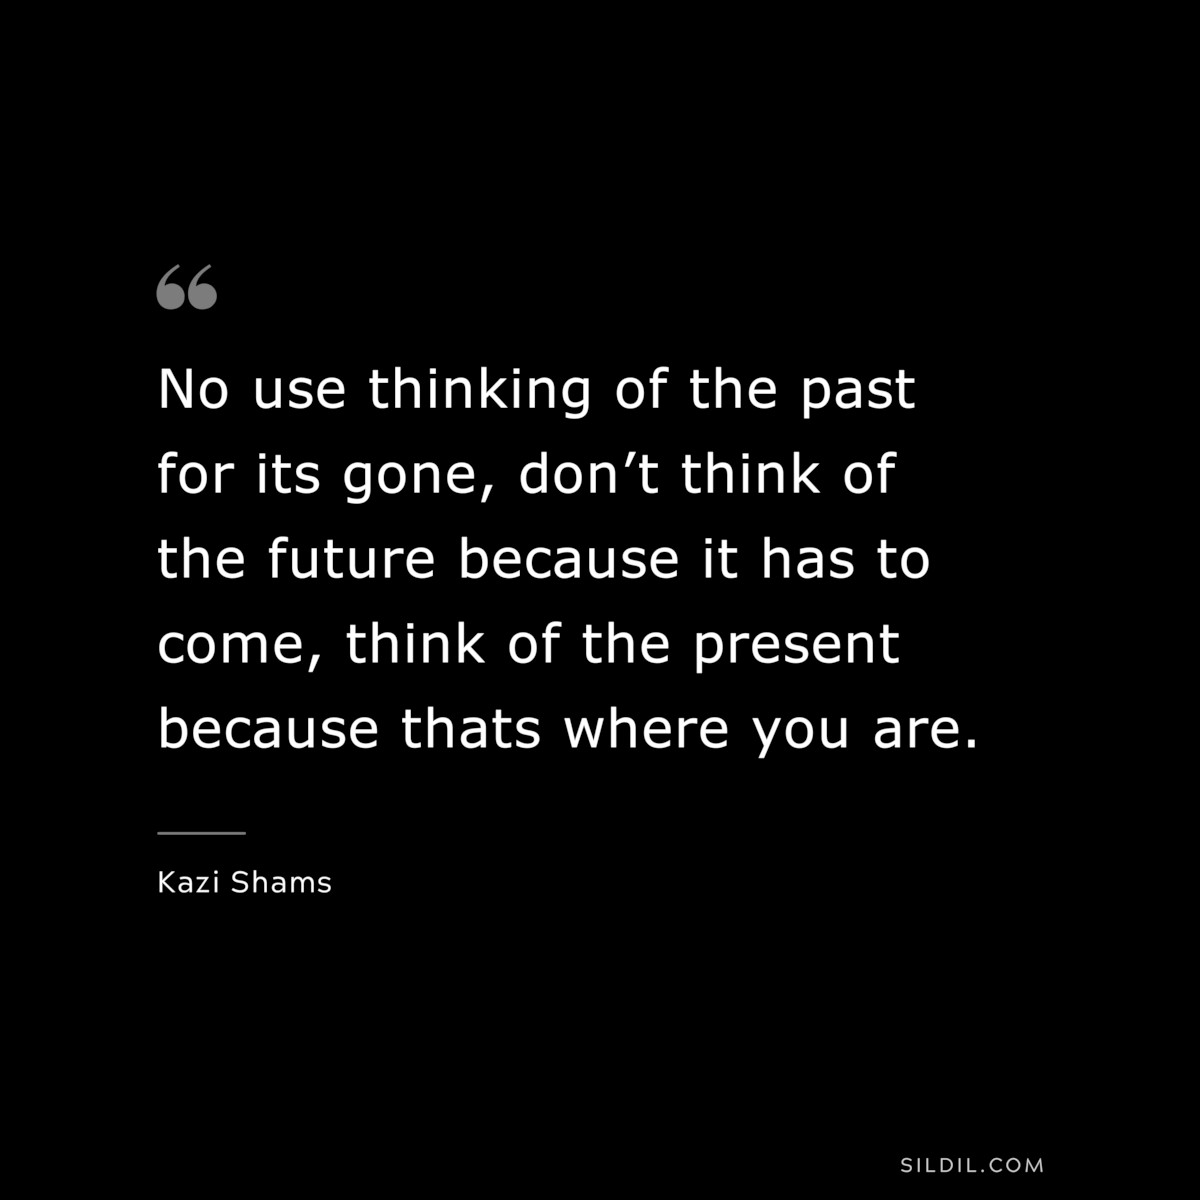 No use thinking of the past for its gone, don’t think of the future because it has to come, think of the present because thats where you are. ― Kazi Shams